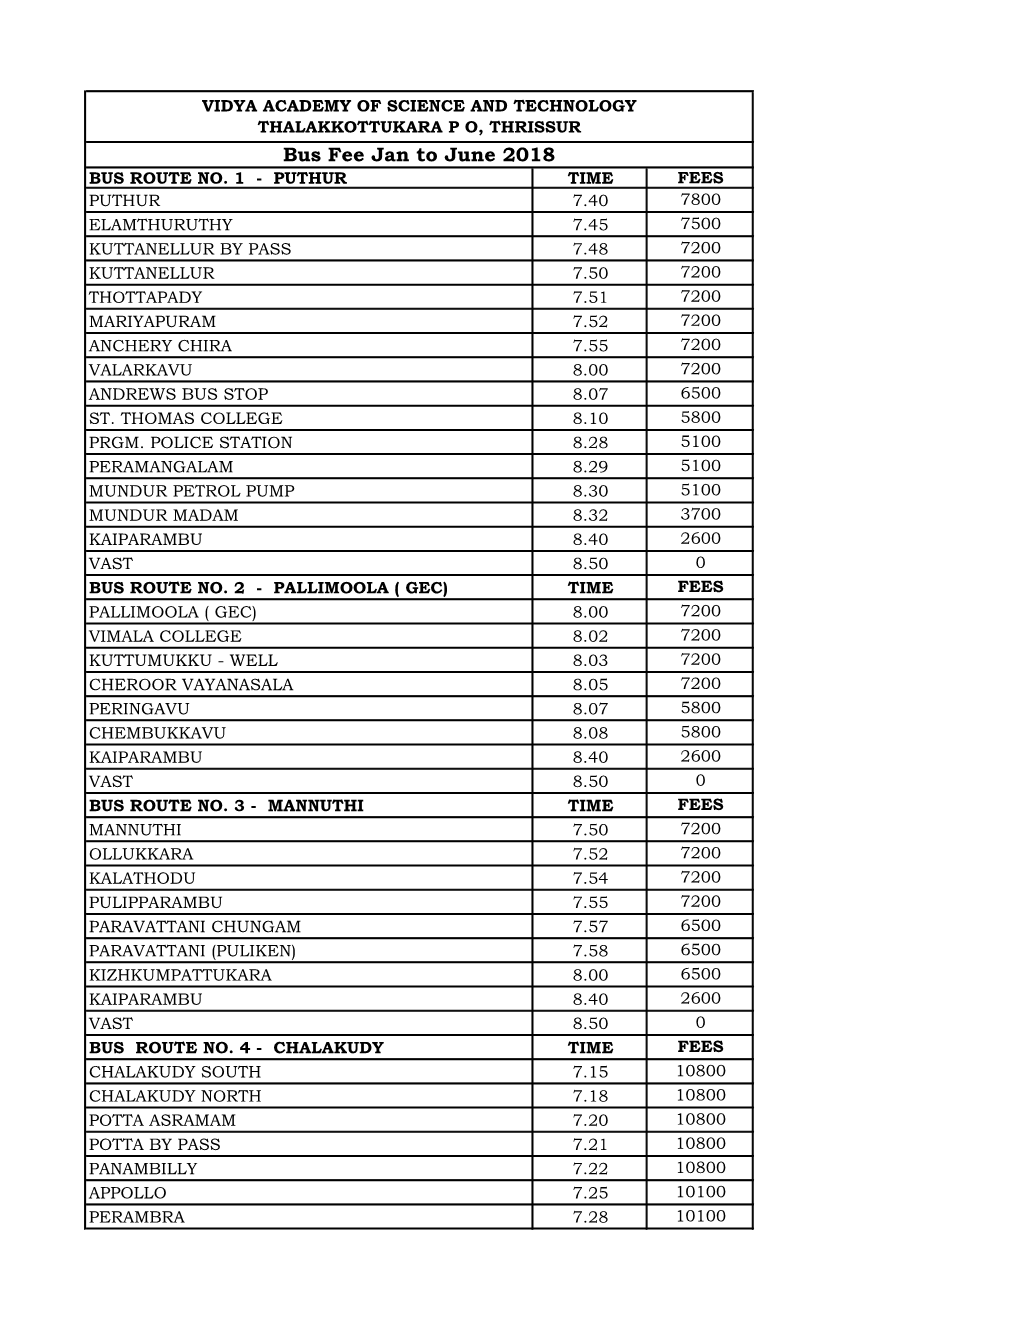 Bus Fee Jan to June 2018 BUS ROUTE NO. 1